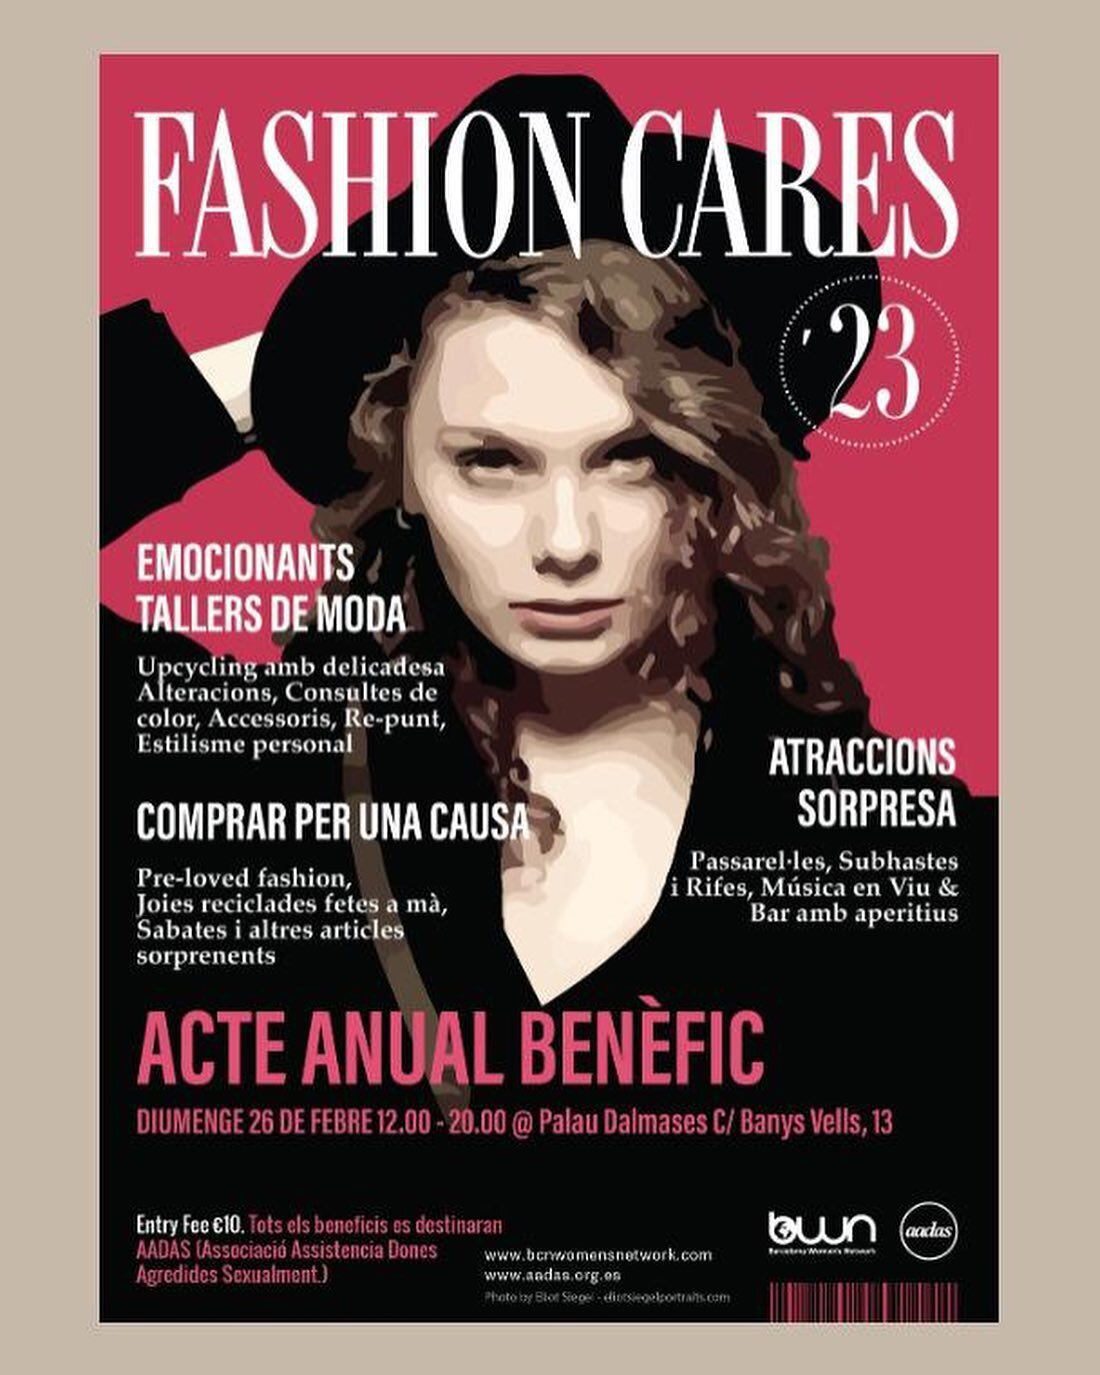 ✨Hey guys, I will be doing a talk here about styling your pre-loved items. Come check out this Charity event! ✨ Fashion Cares &lsquo;23
is a huge sustainable fashion event to raise money for AADAS&hellip; a charity in BCN that supports female victims